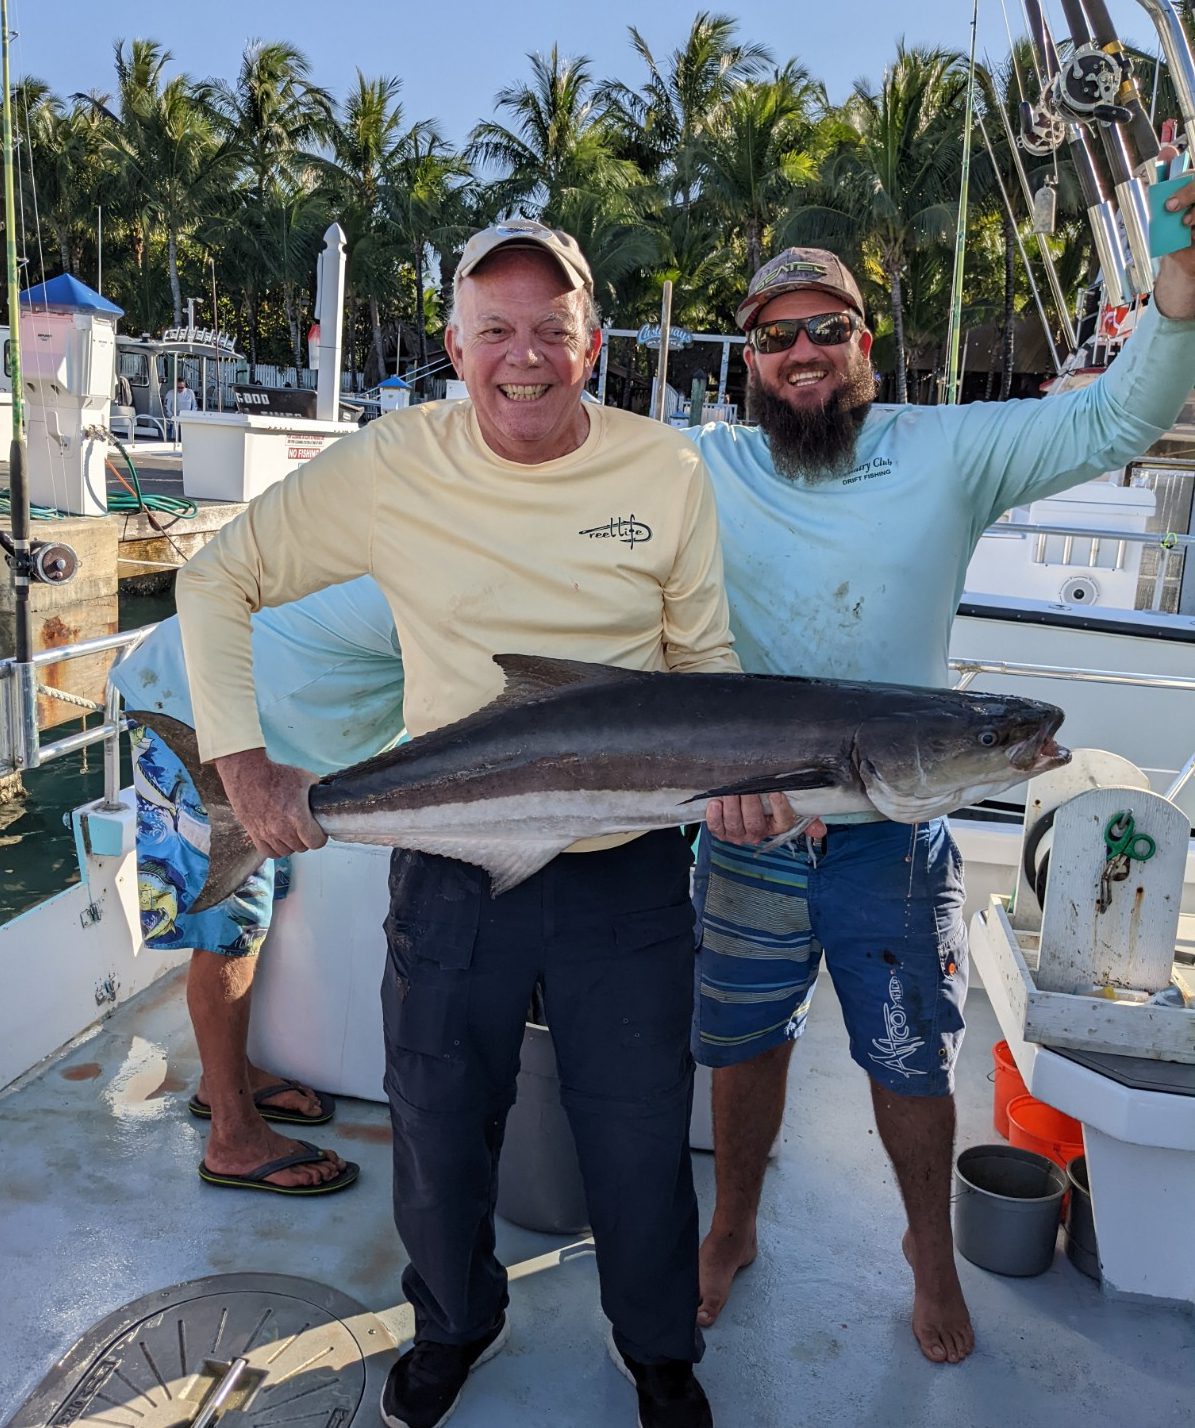 Cobia Back Deck of Country Club boat - Coastal Angler & The Angler Magazine